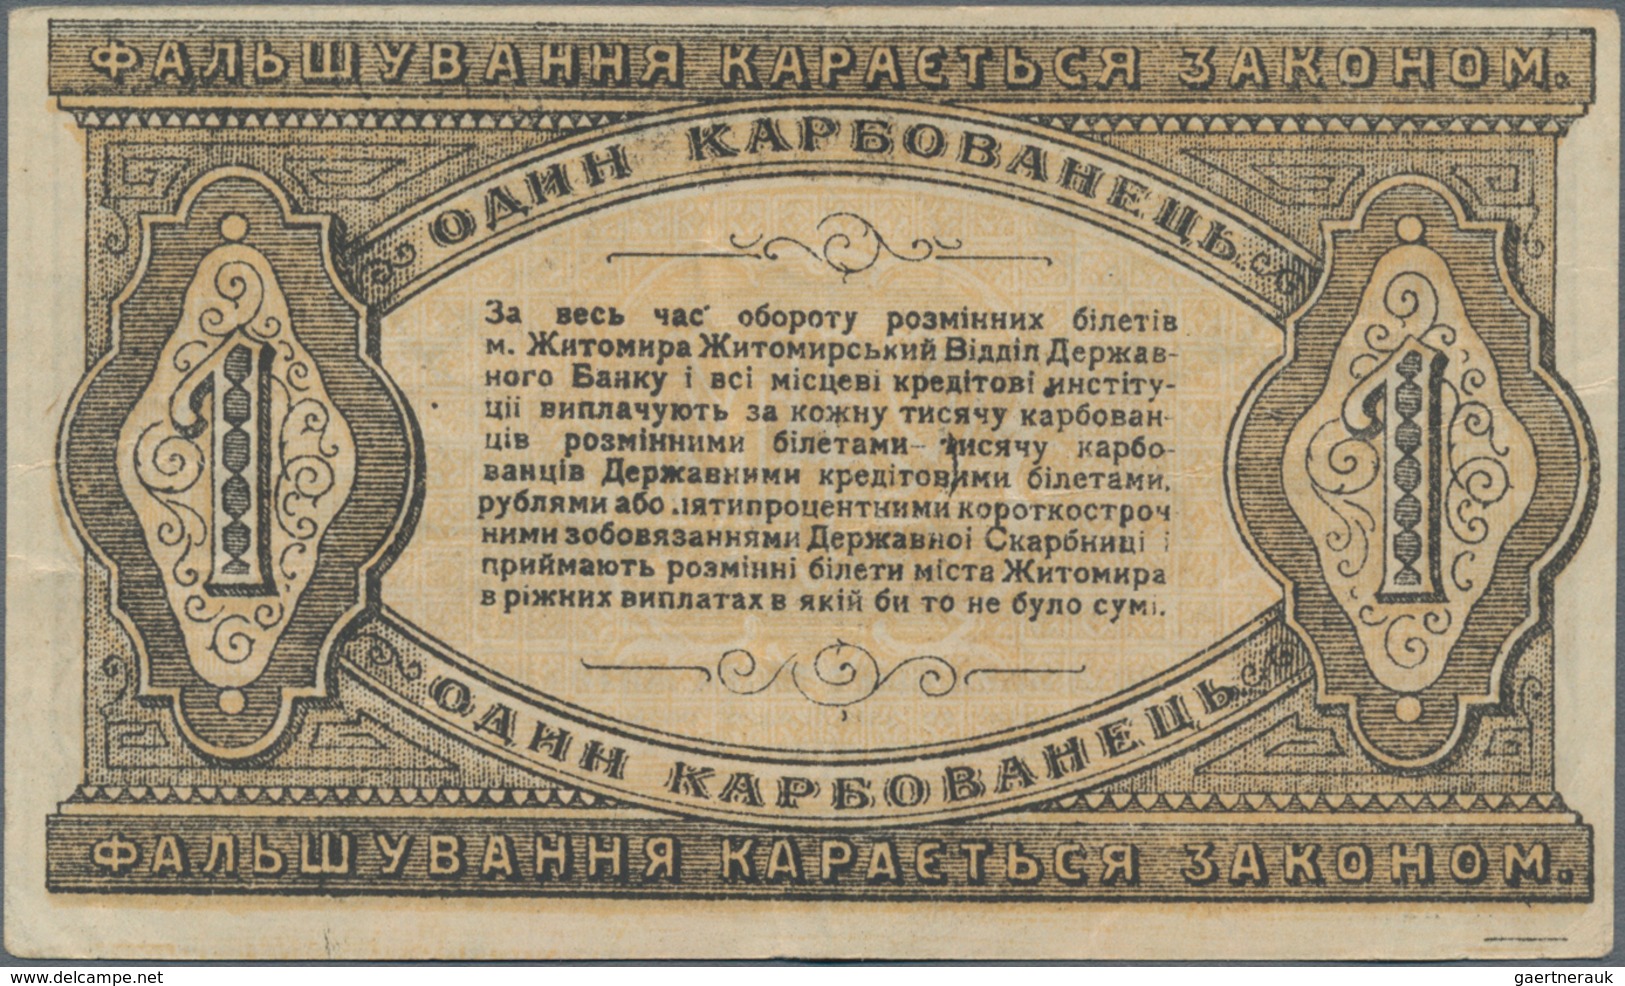 Russia / Russland: Ukraine & Crimea – ZHYTOMYR City Set With 3 Banknotes 1, 3, 5 Karbovanets 1918, P - Rusia